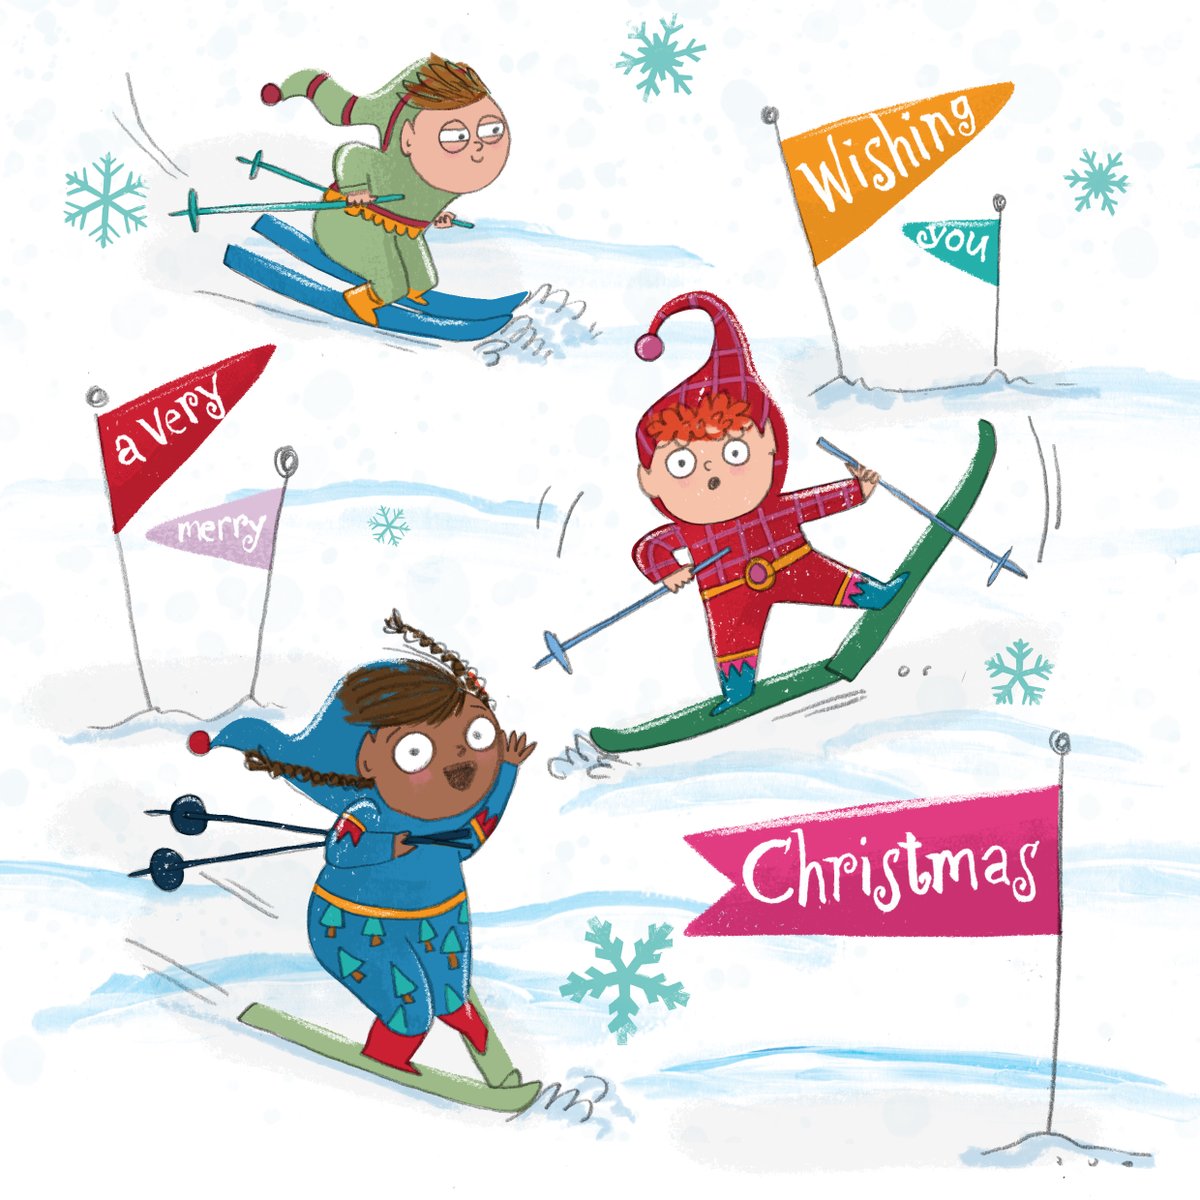 The elves are working hard this year to bring you all a wonderful Christmas! Designs by #BrightArtist @PG_Illustration Pauline is represented by #BrightAgent Anthony Hannant The Greetings agent here at Bright is Jo Astles See Pauline's Portfolio > ow.ly/wTPy50Qkb3q